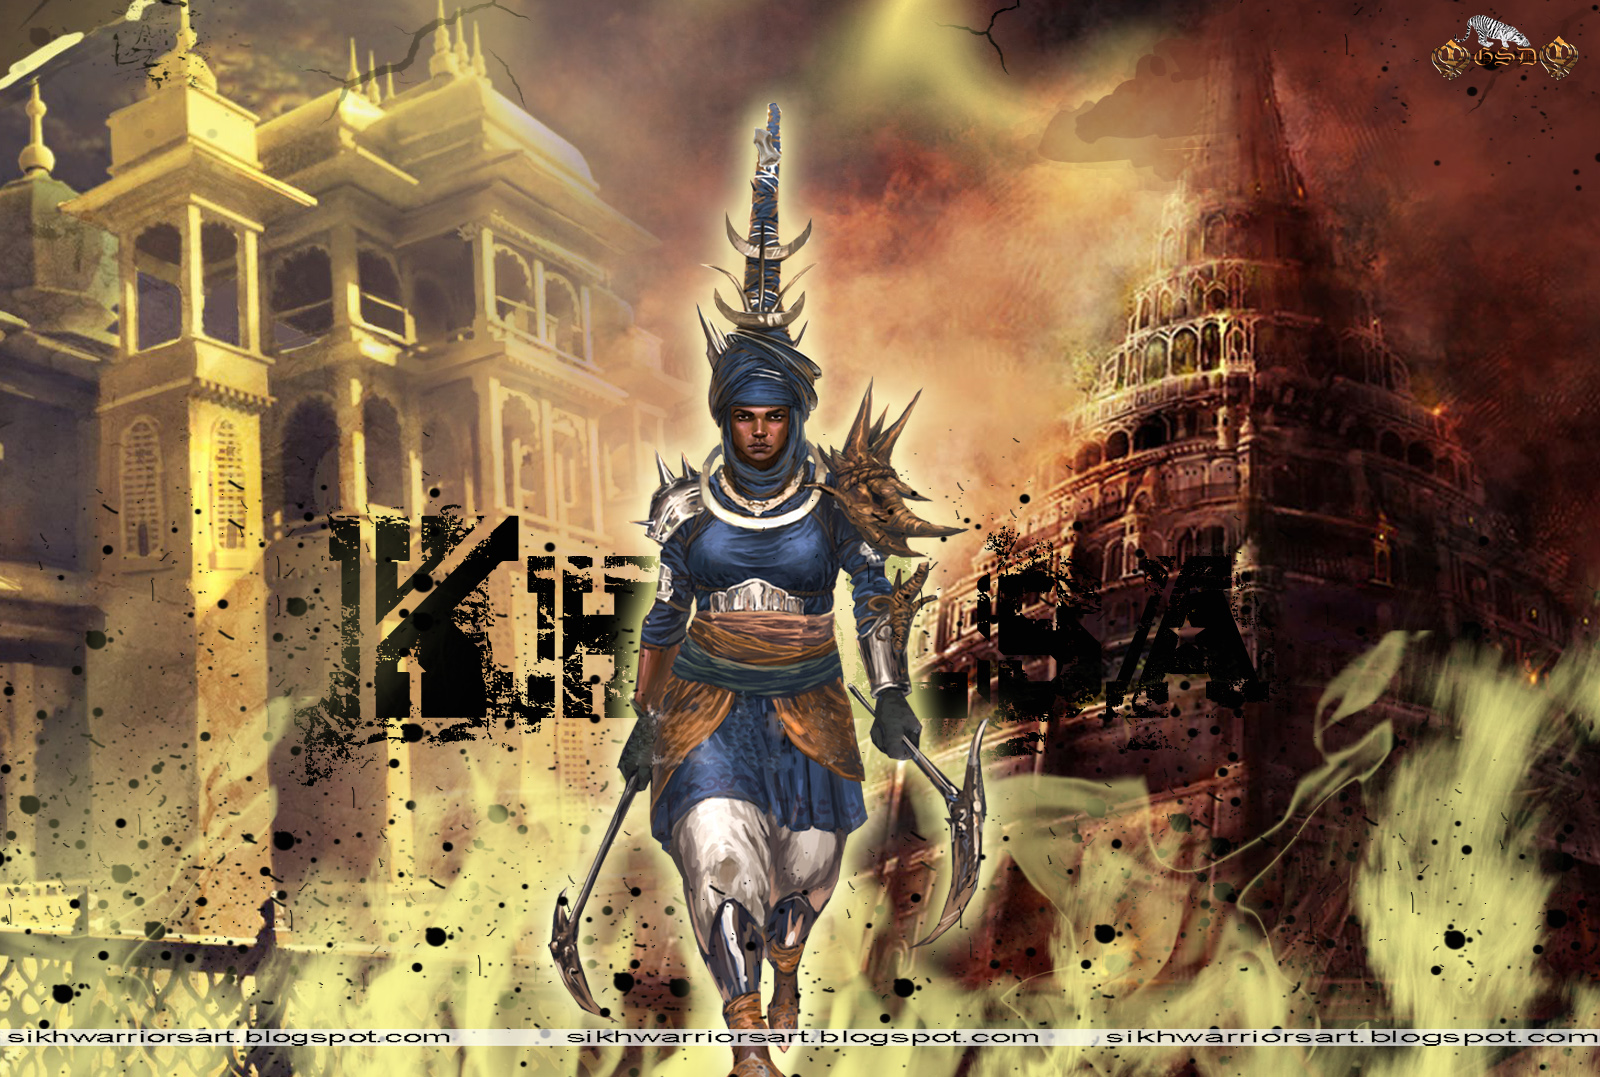 Here is another wallpaper of Sikh women warriorthis warrior